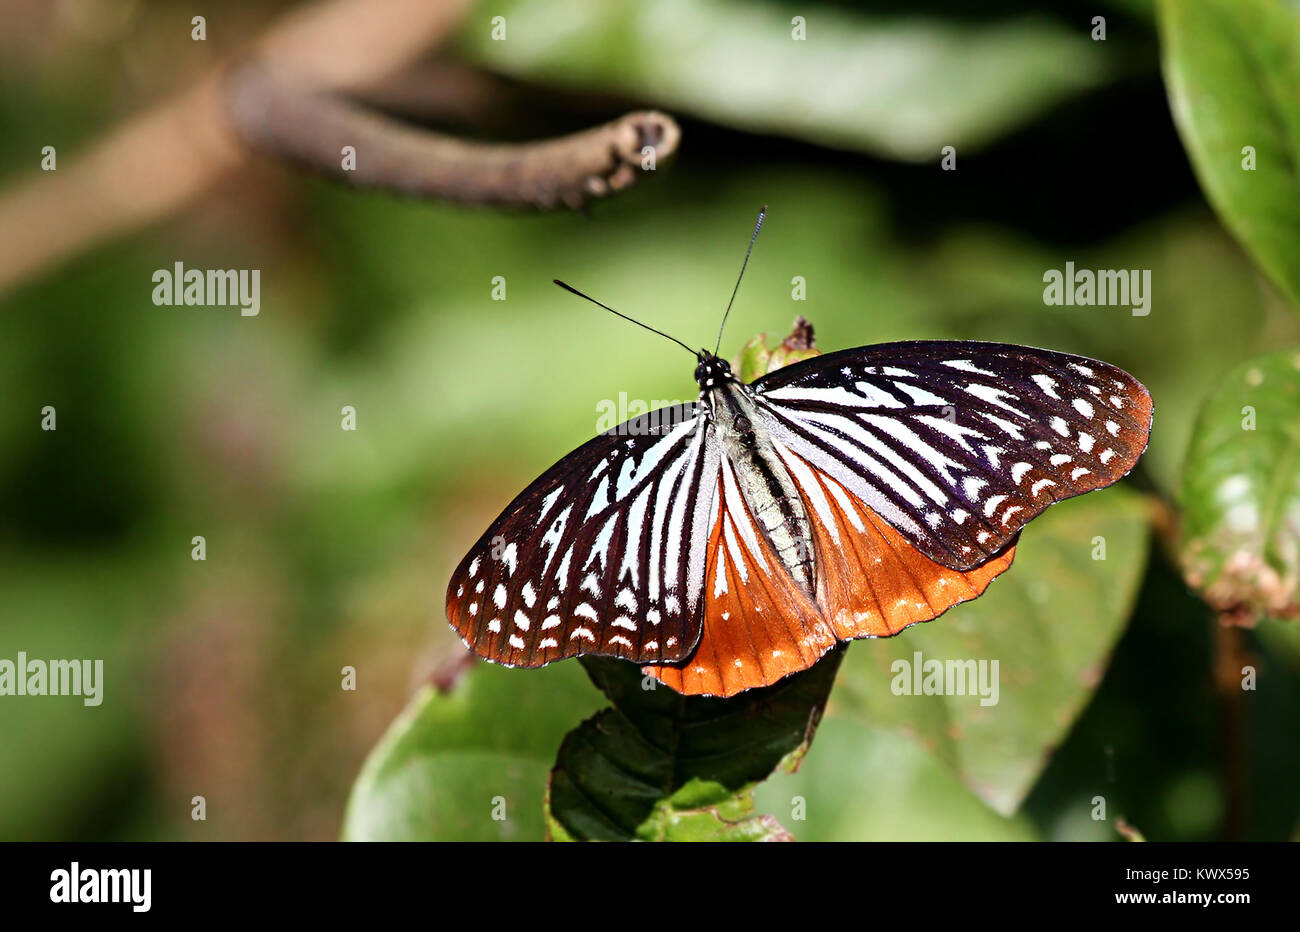 Circe butterfly Foto Stock